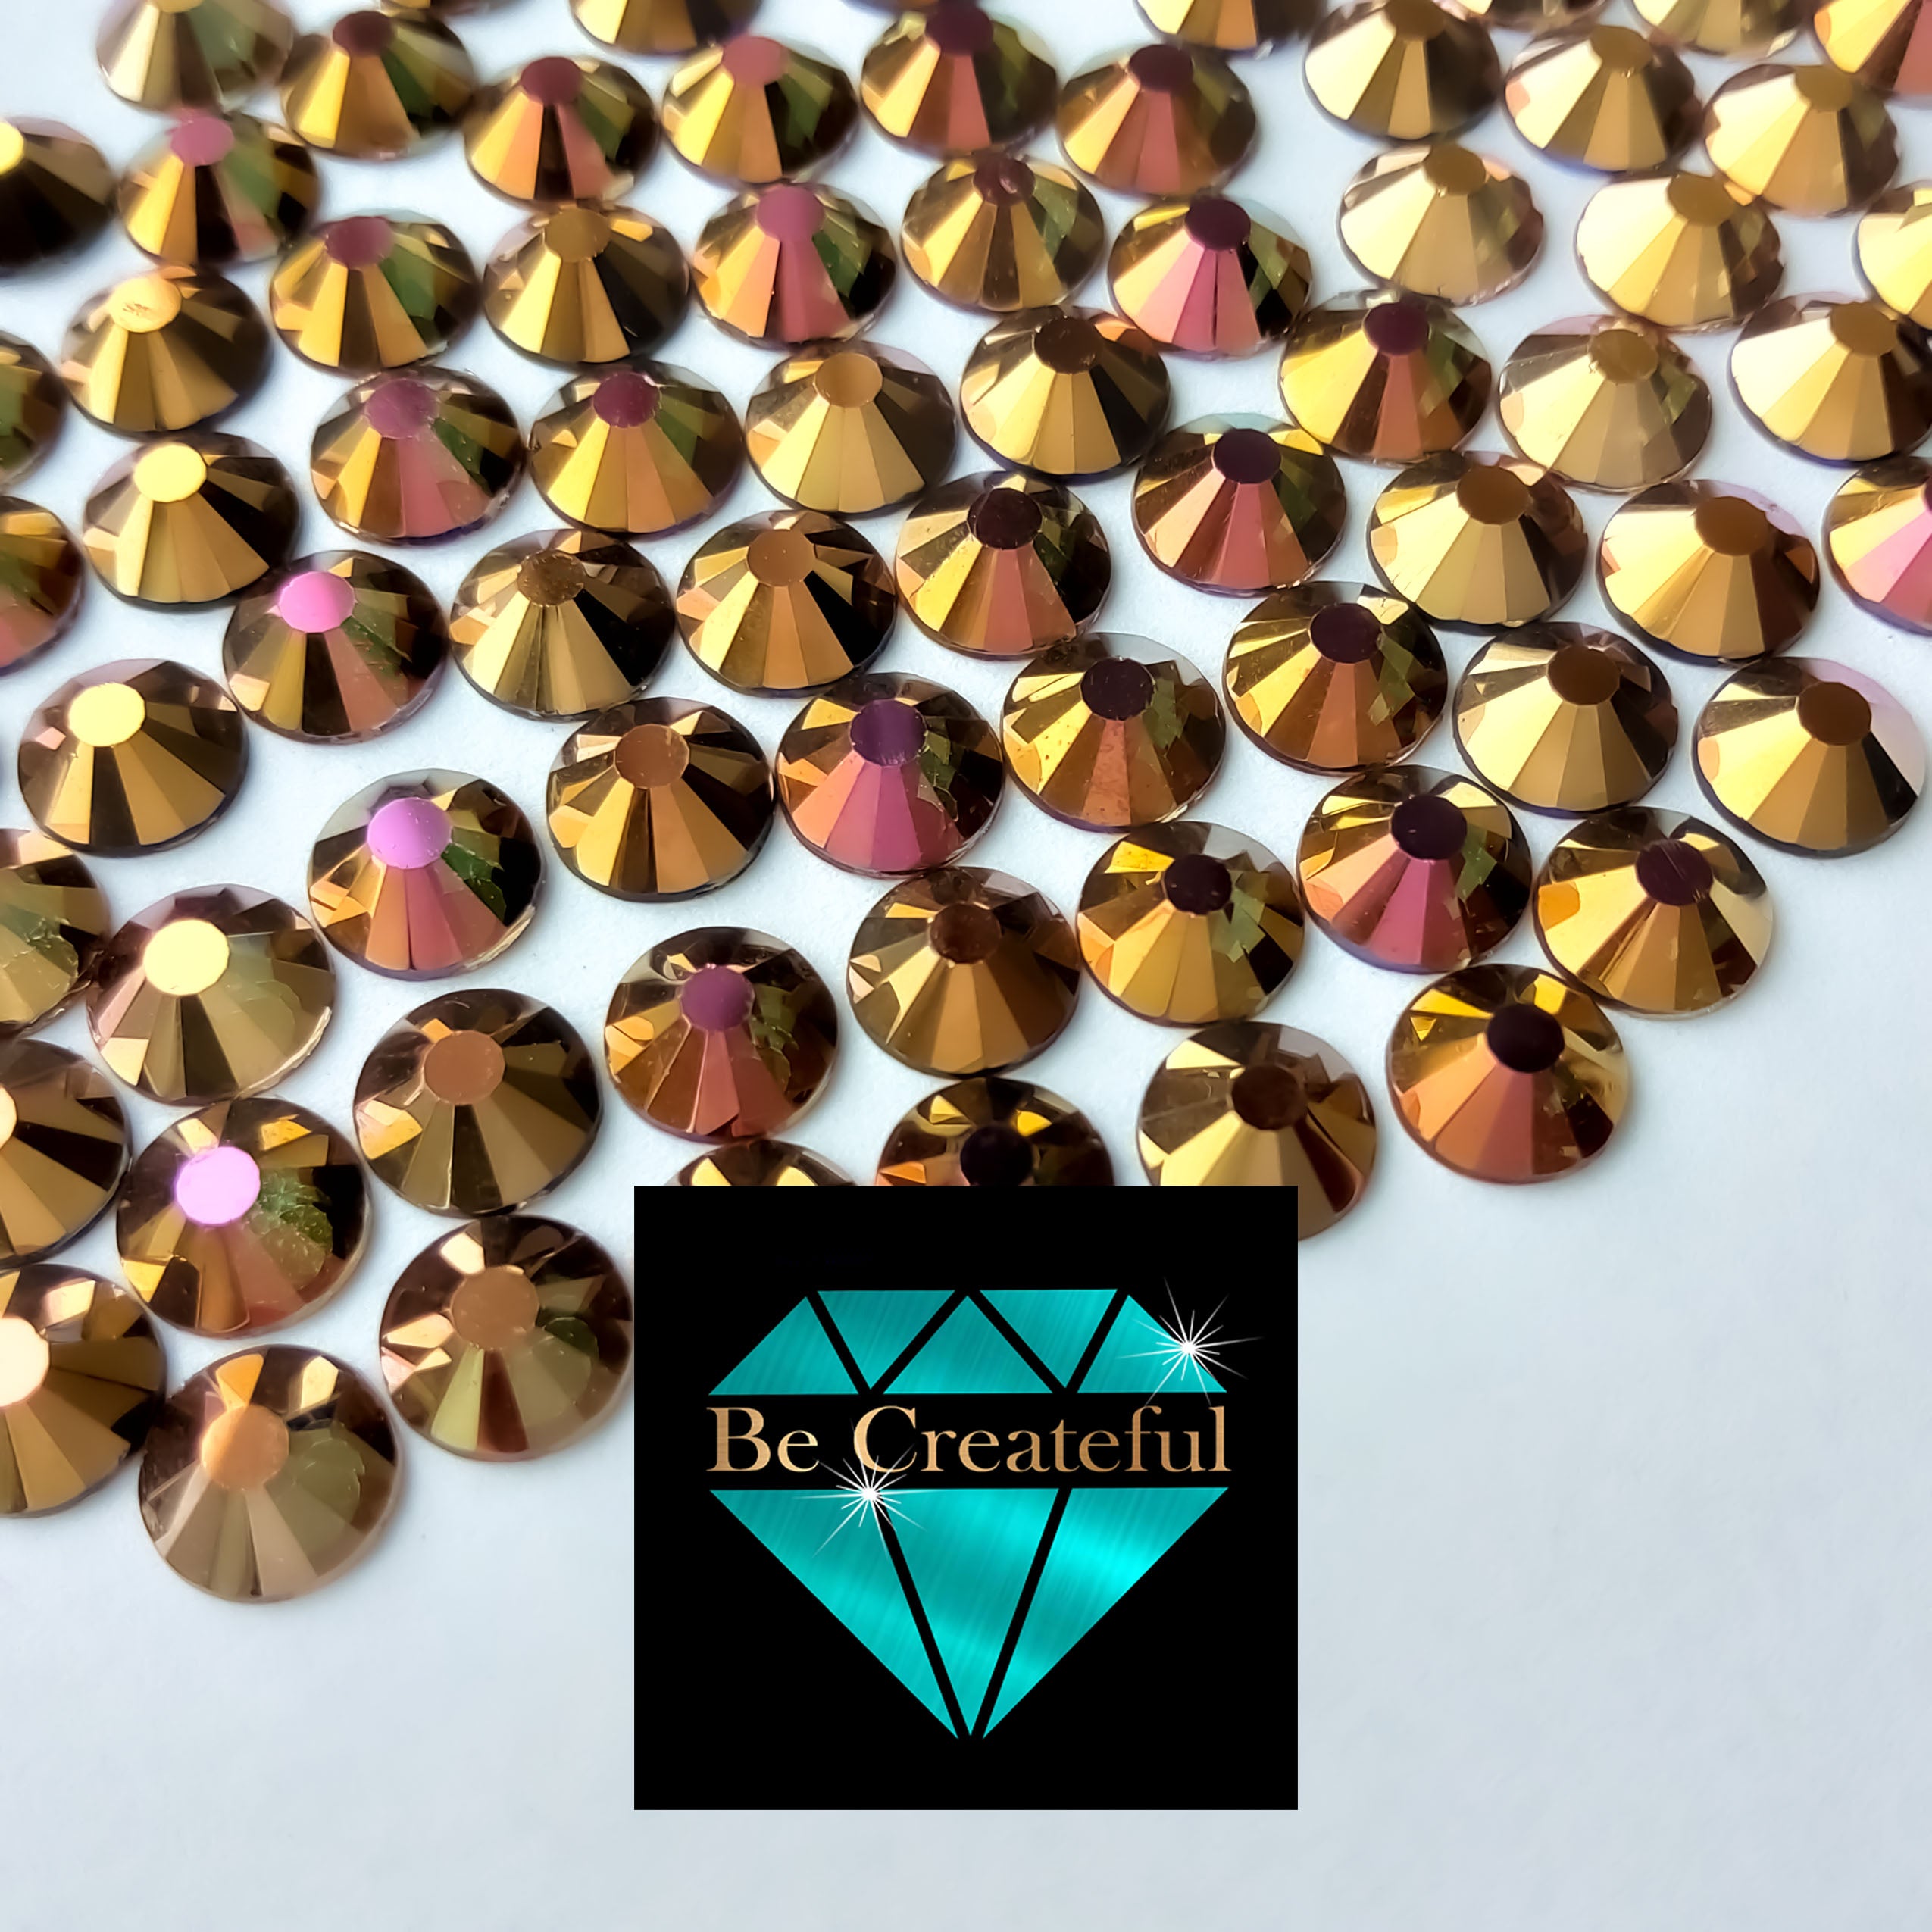 Crystal AB Gold Back Rhinestone – Bling on the Chaos